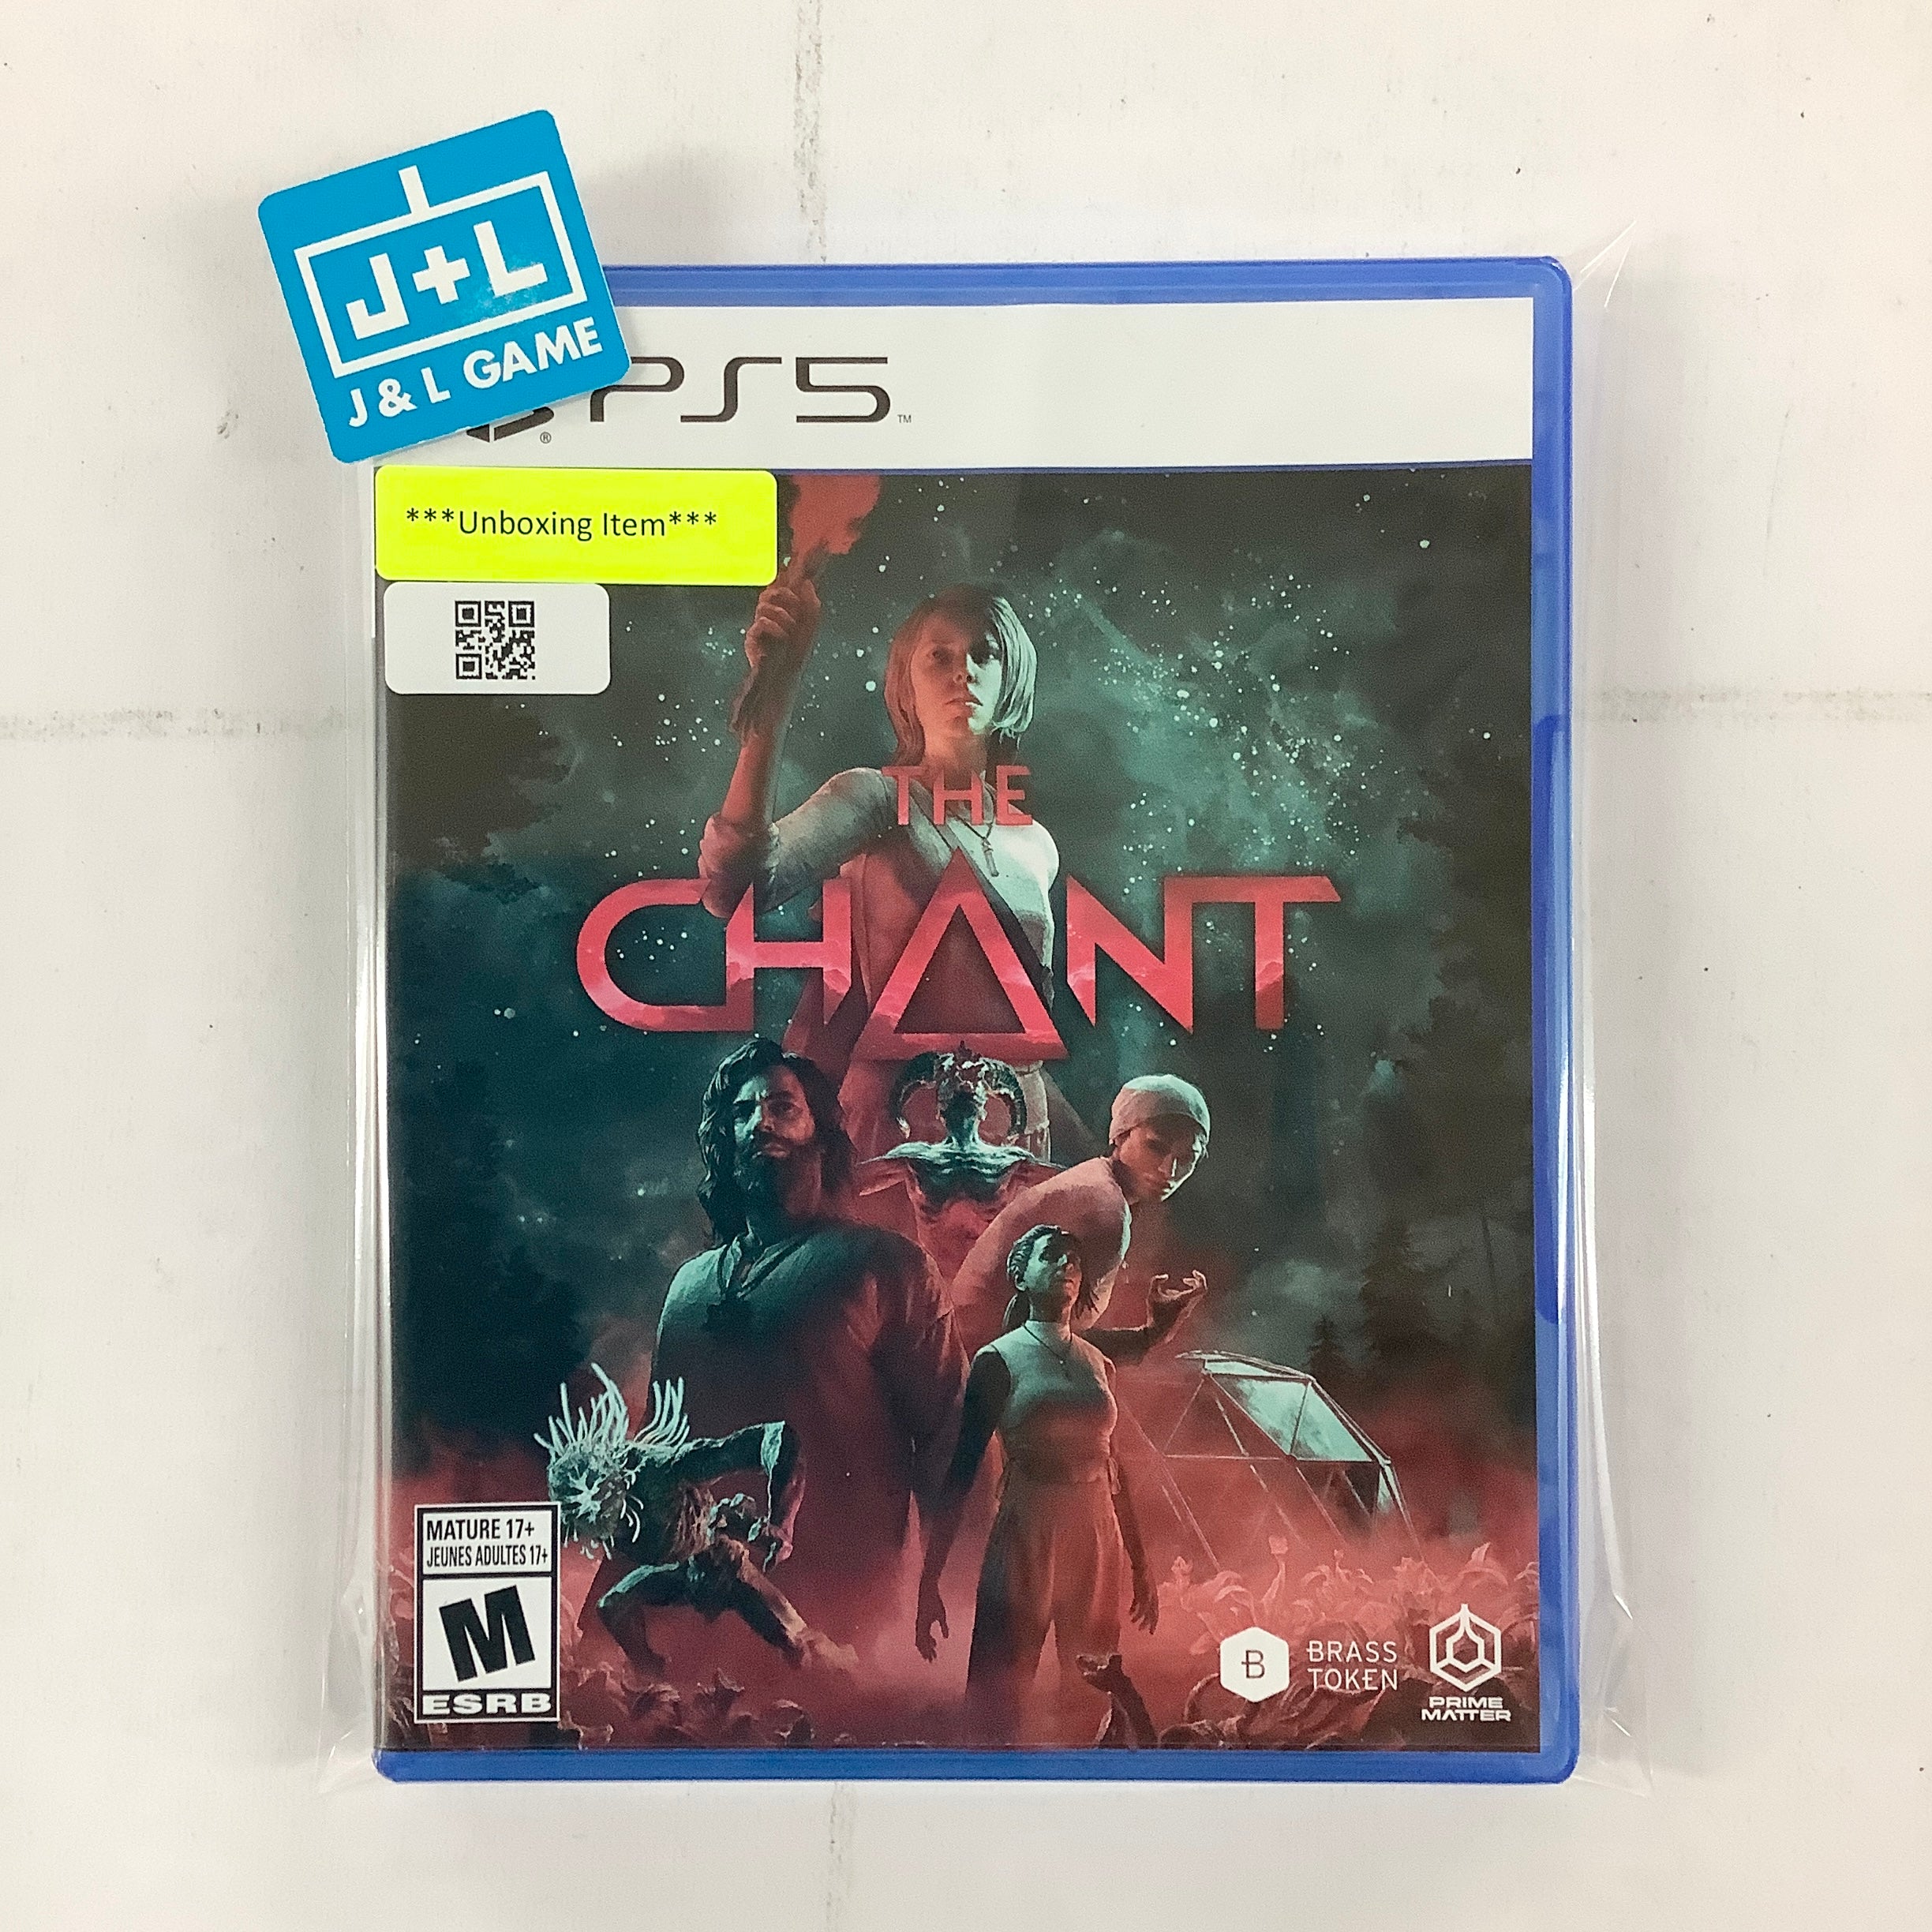 The Chant - (PS5) PlayStation 5 [UNBOXING] Video Games Deep Silver   